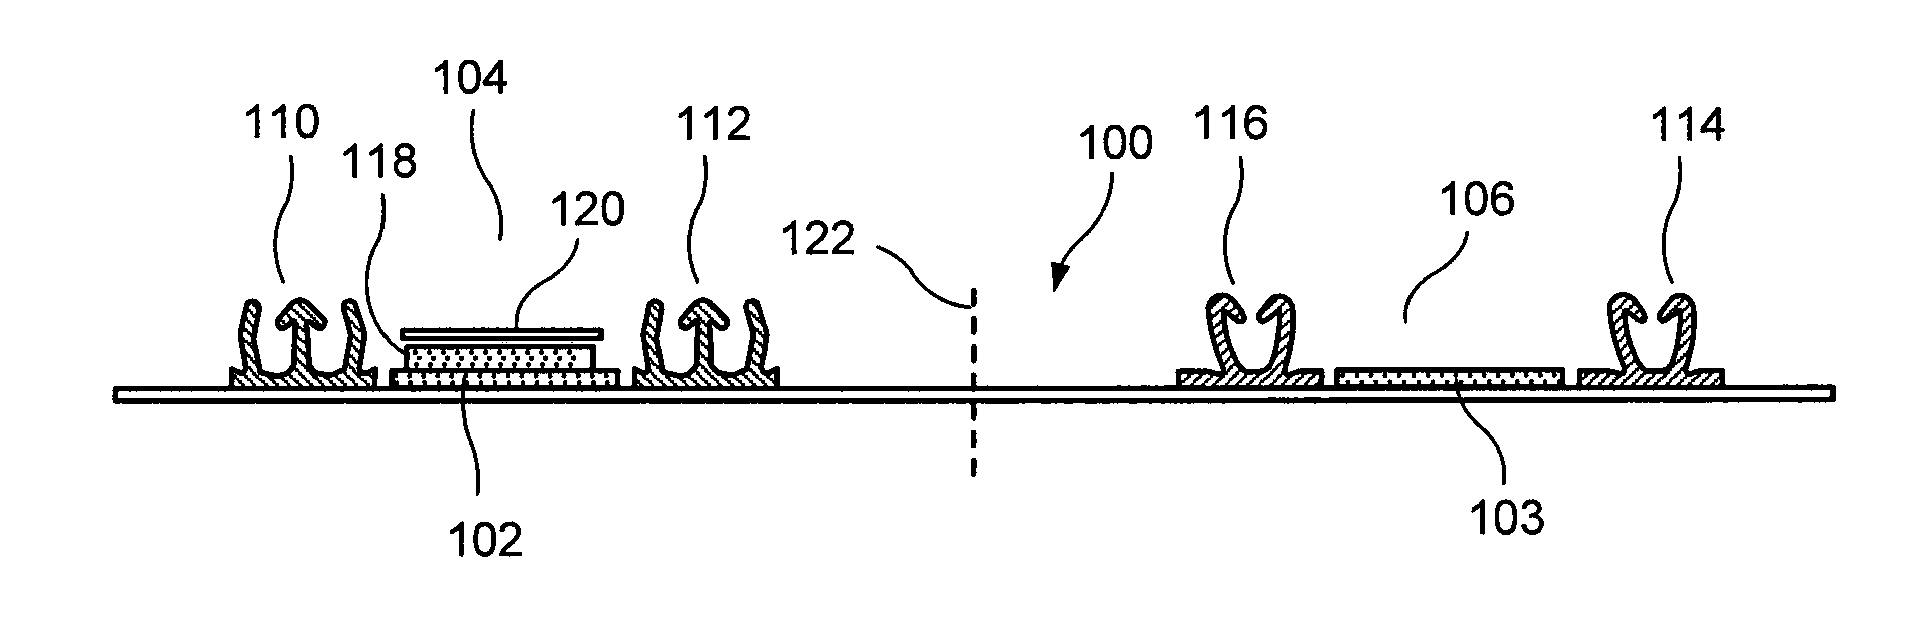 Zipper for security bag and method of manufacture thereof